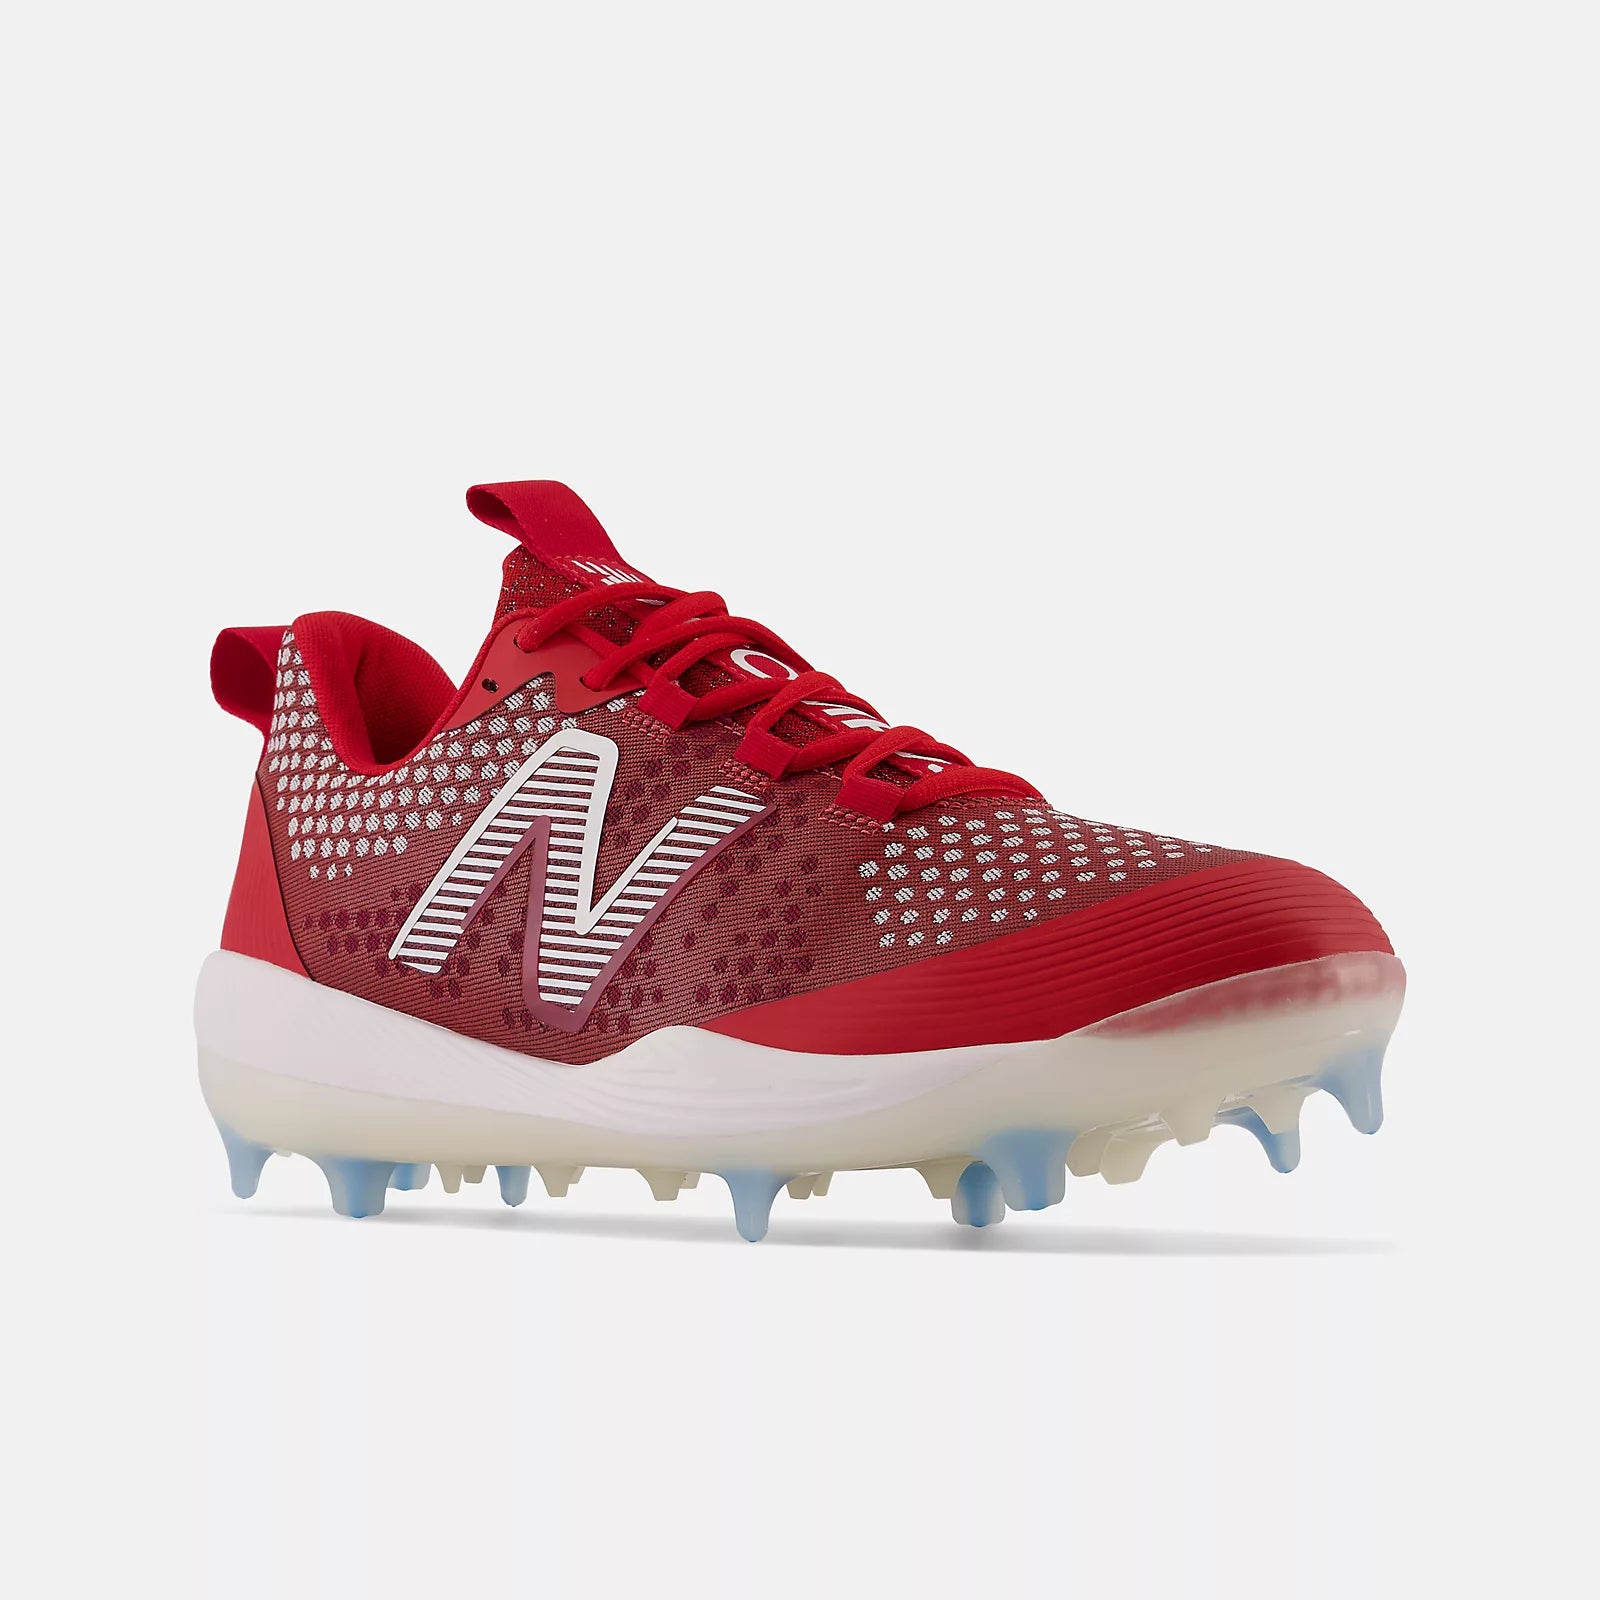 New Balance - FuelCell COMPv3 Red Hybrid Baseball Cleats (LCOMPTR3)